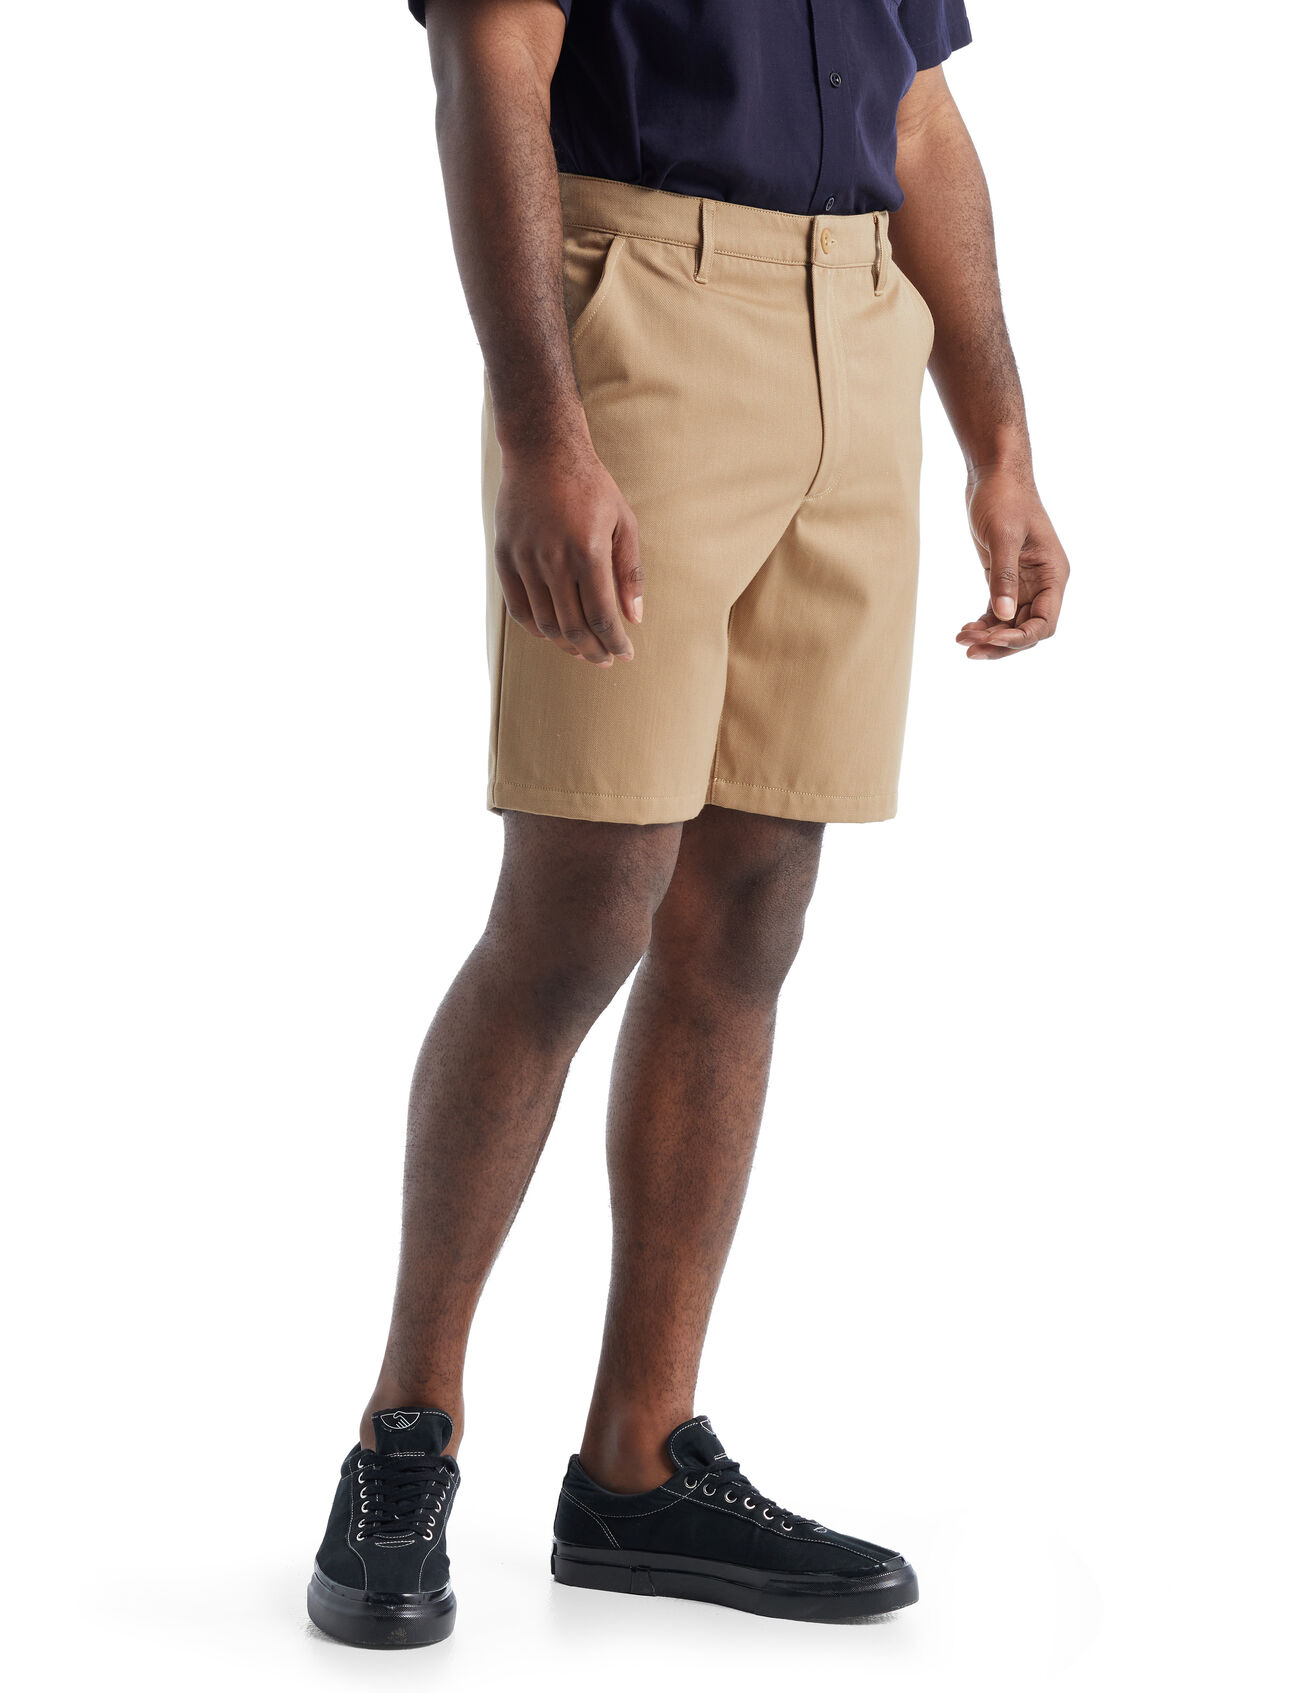 Mens Merino Berlin Shorts A classic and versatile chino short, the Berlin Shorts feature a unique  blend of natural merino wool and organically grown cotton.